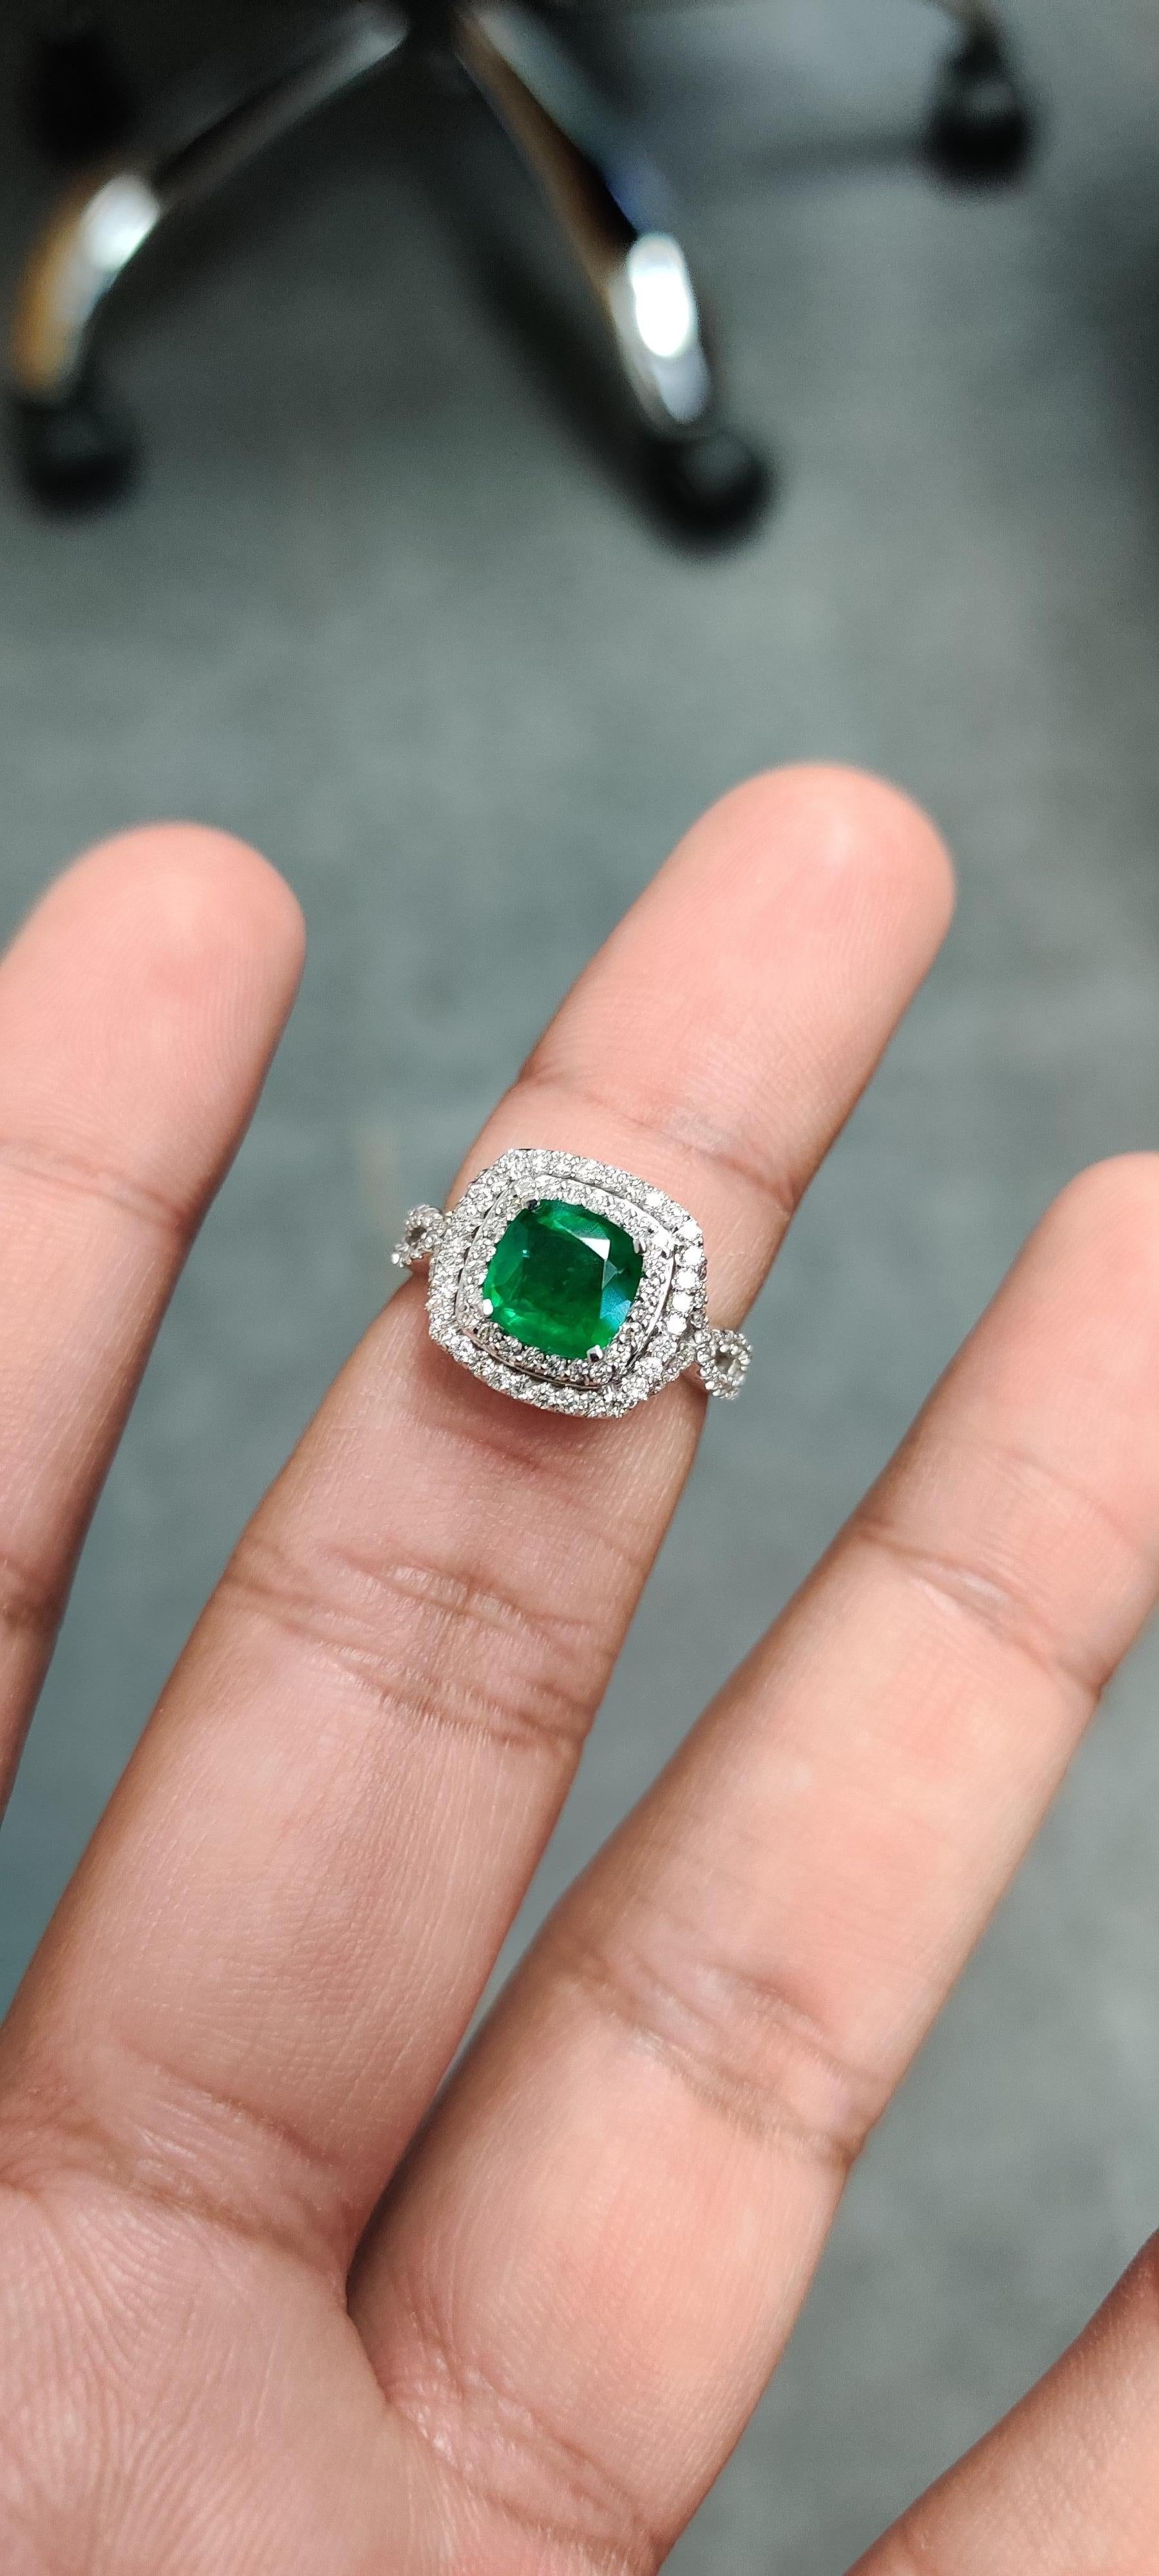 Introducing our stunning 18K Gold Emerald Ring, a radiant symbol of sophistication and grace. This captivating piece features a vibrant 1.26 carat emerald sourced from Zambia, renowned for its rich color and exceptional clarity. Enhanced with minor